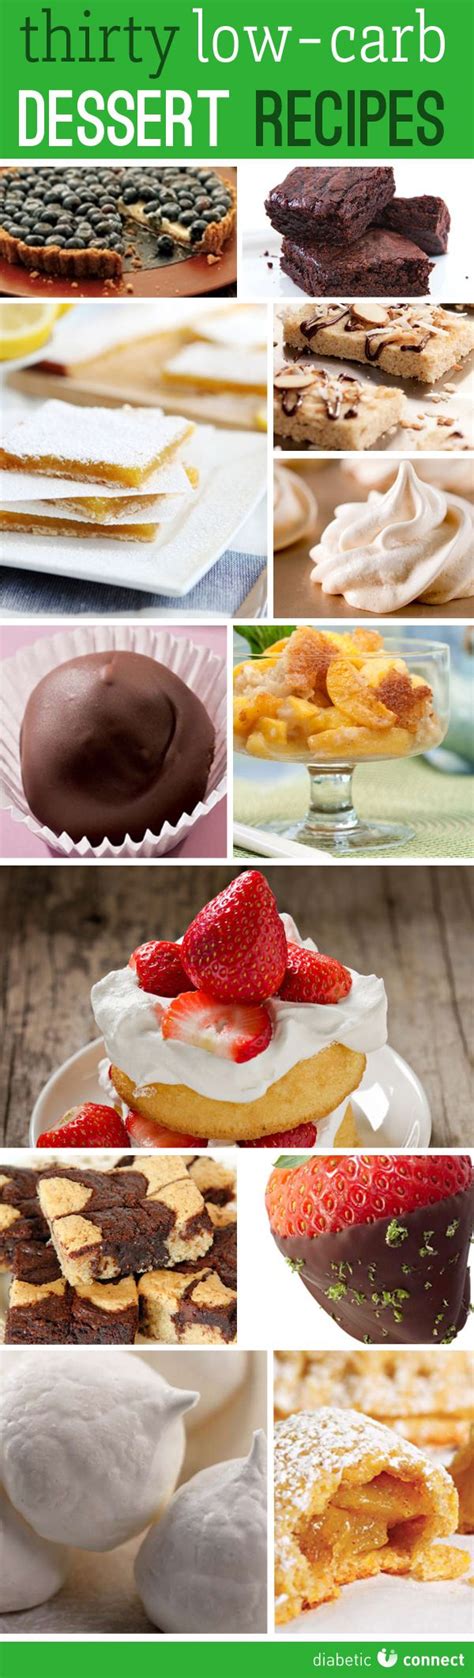 She focuses on using natural sugars and. Most Popular Low Carb Desserts - Page 4 - Weight Loss ...